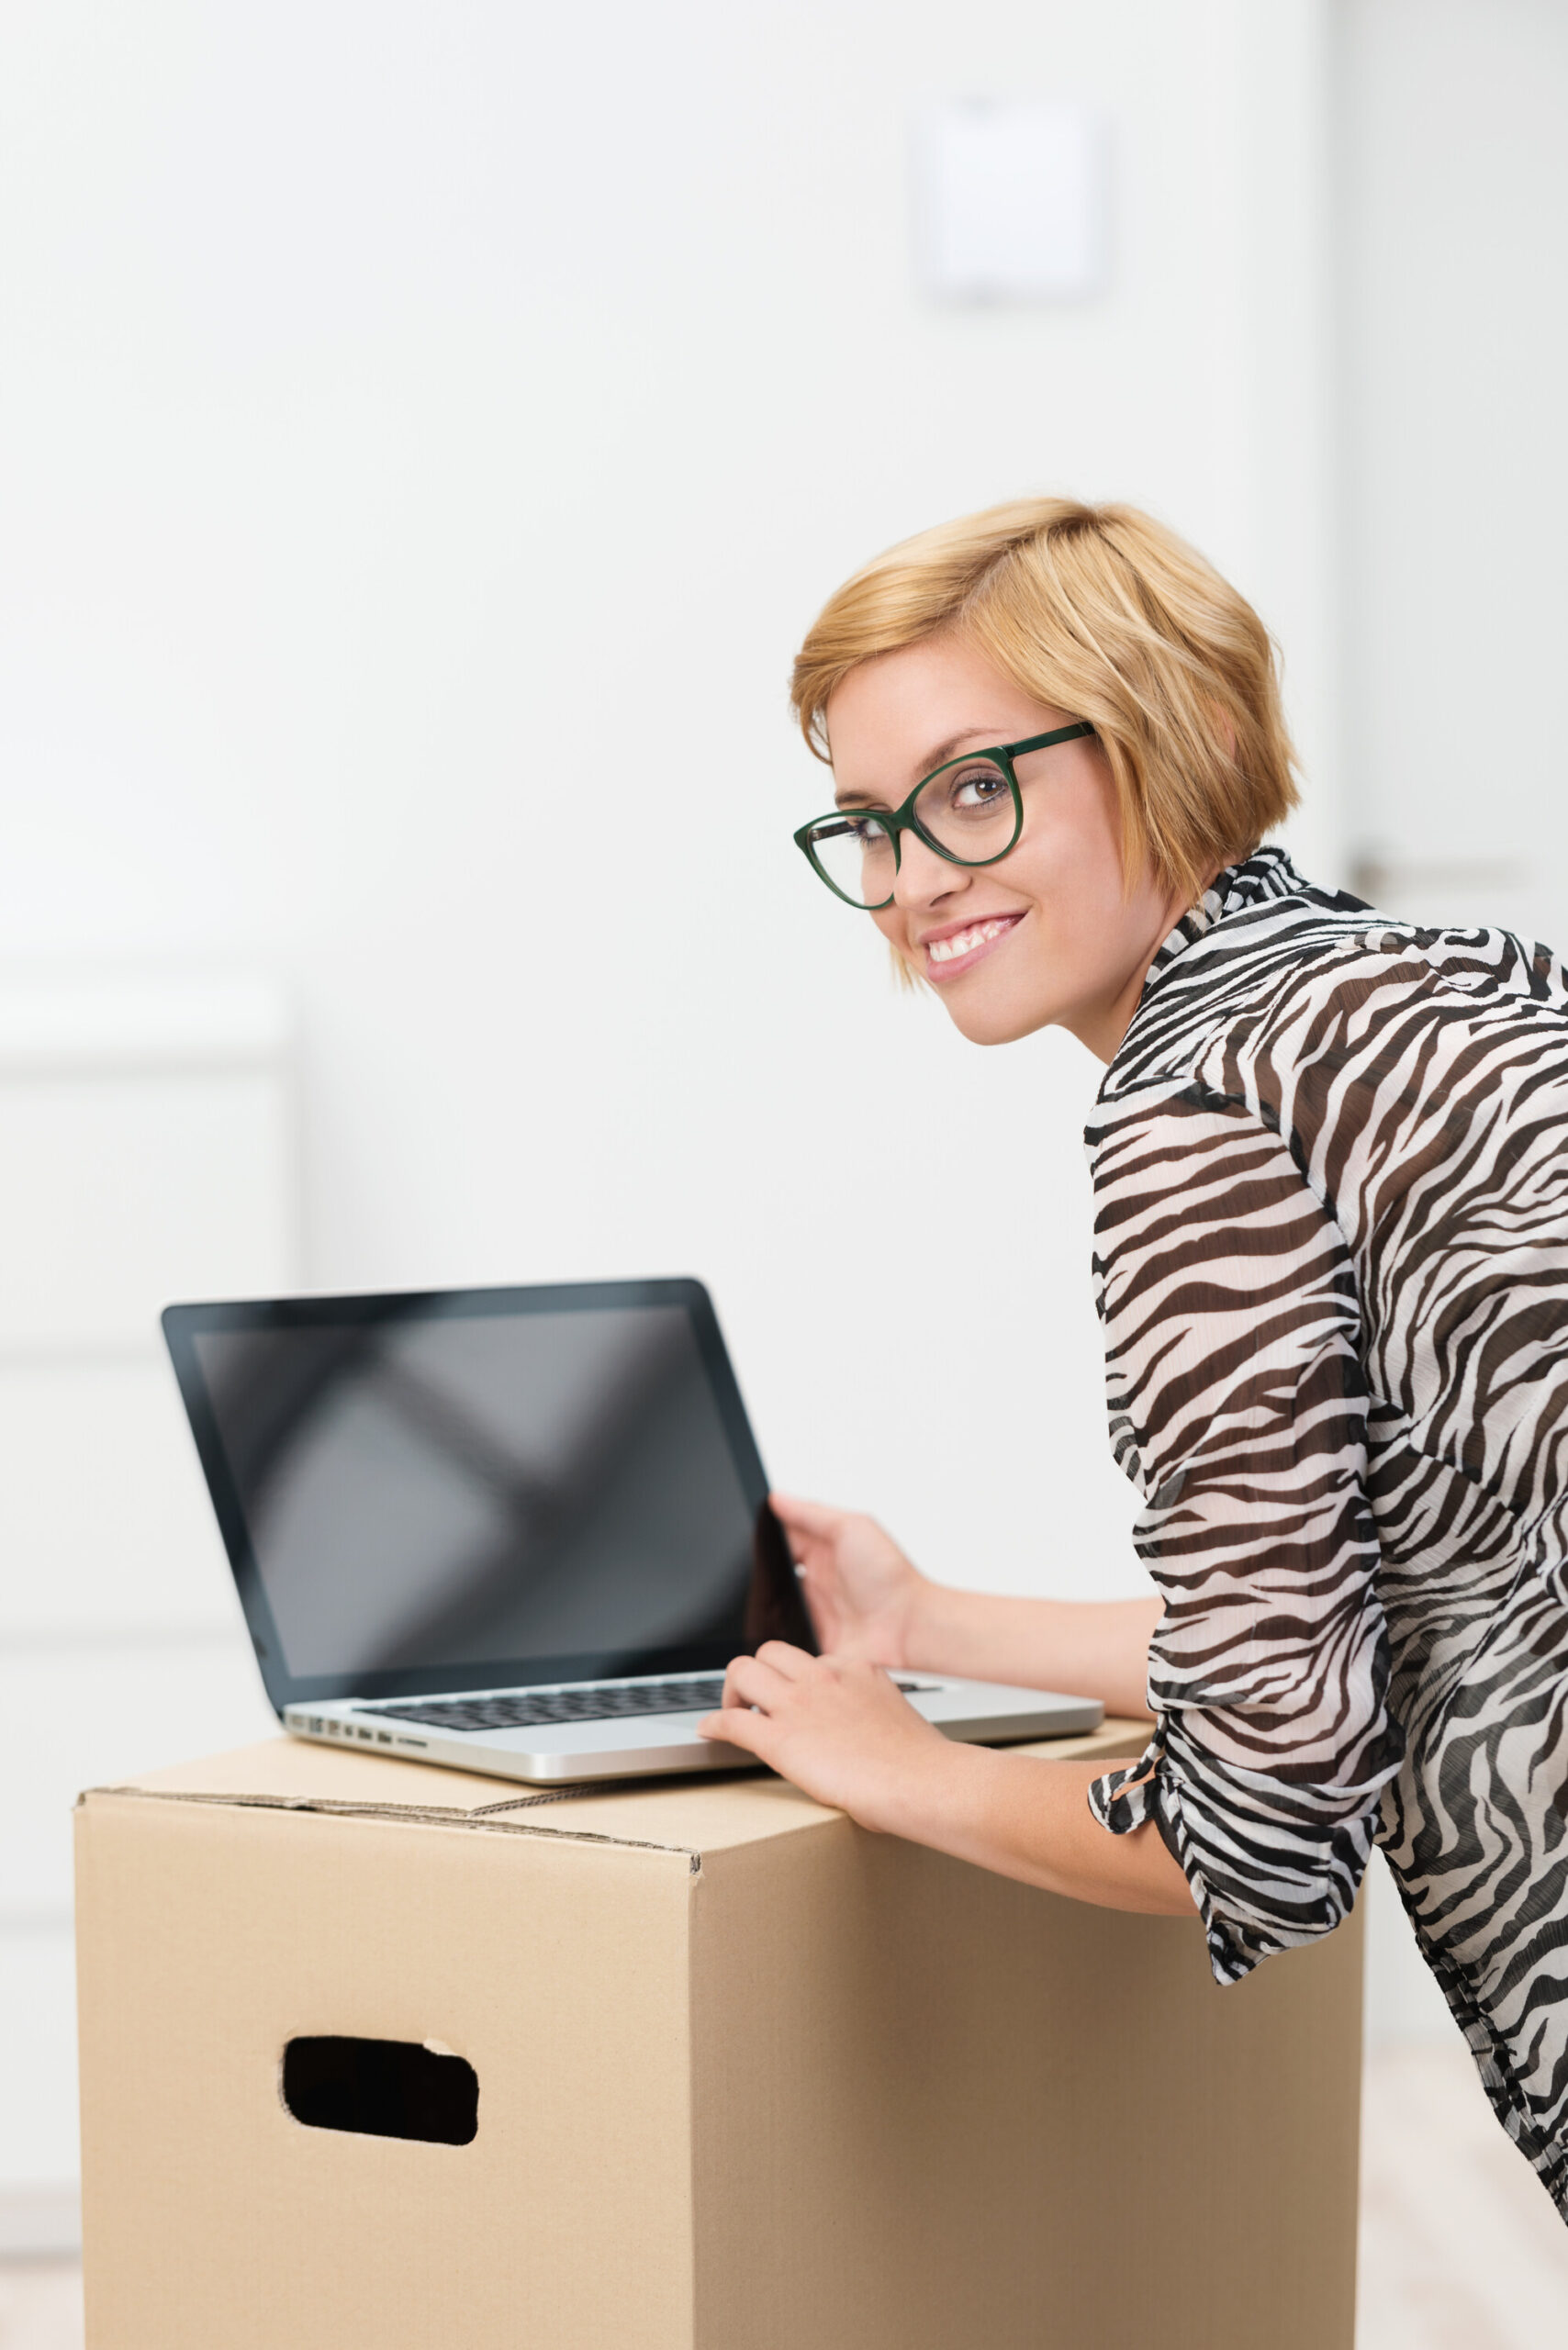 5 Ways to Stay Organized When Moving Your Home-Based Business